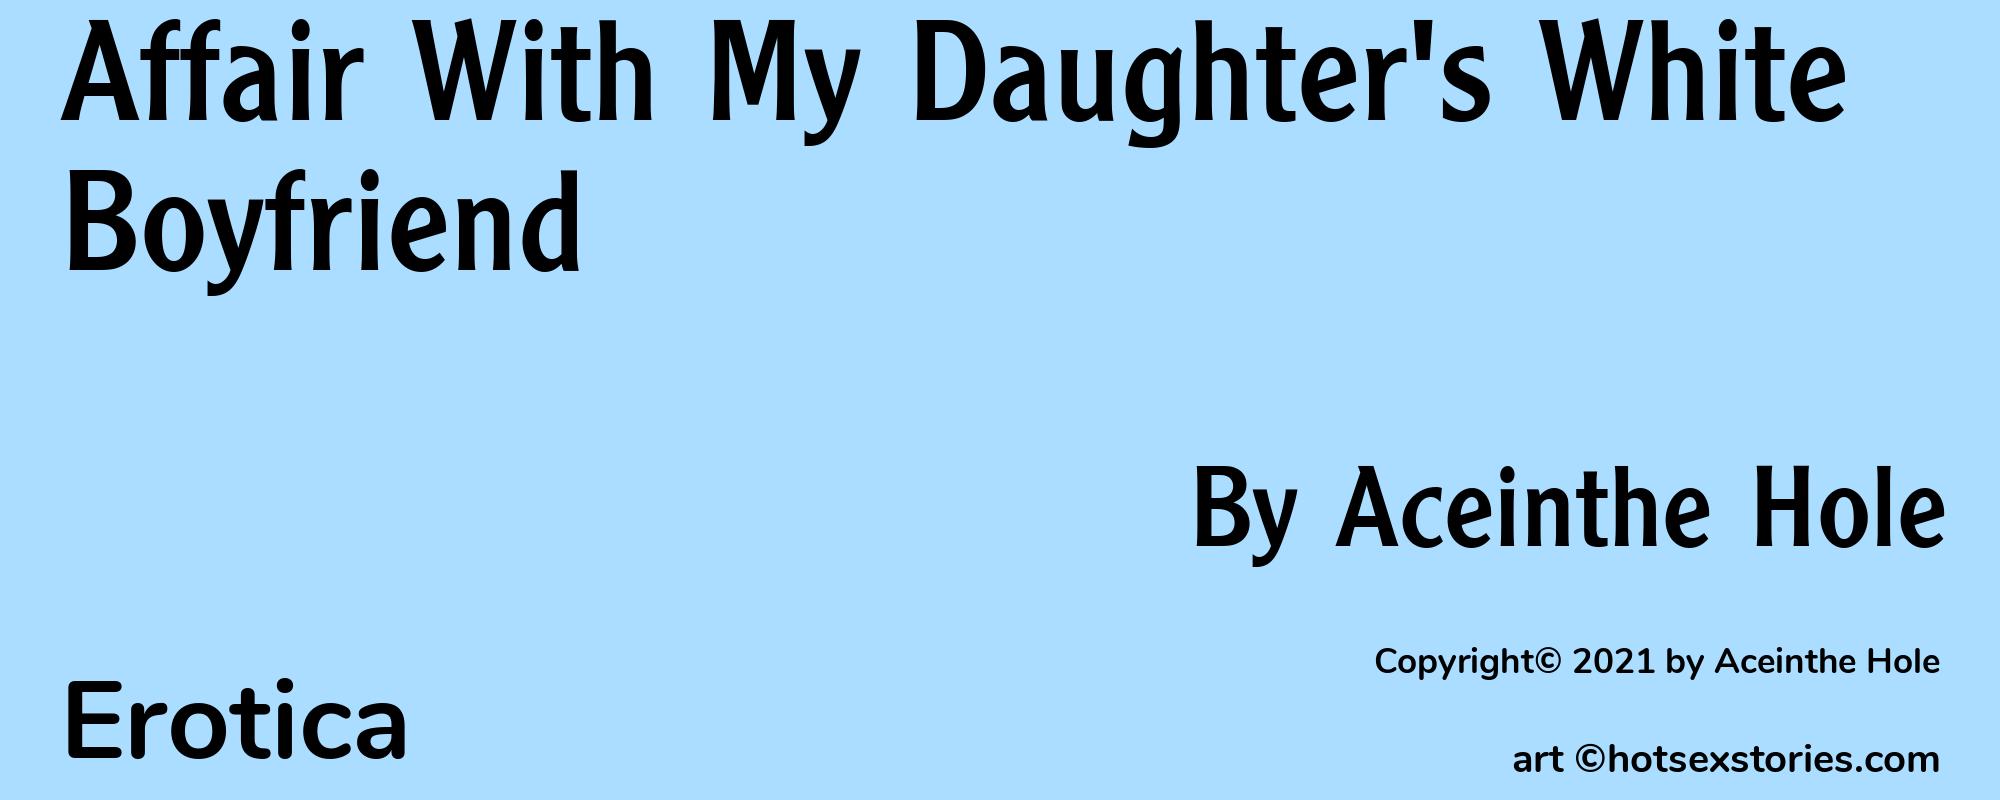 Affair With My Daughter's White Boyfriend - Cover